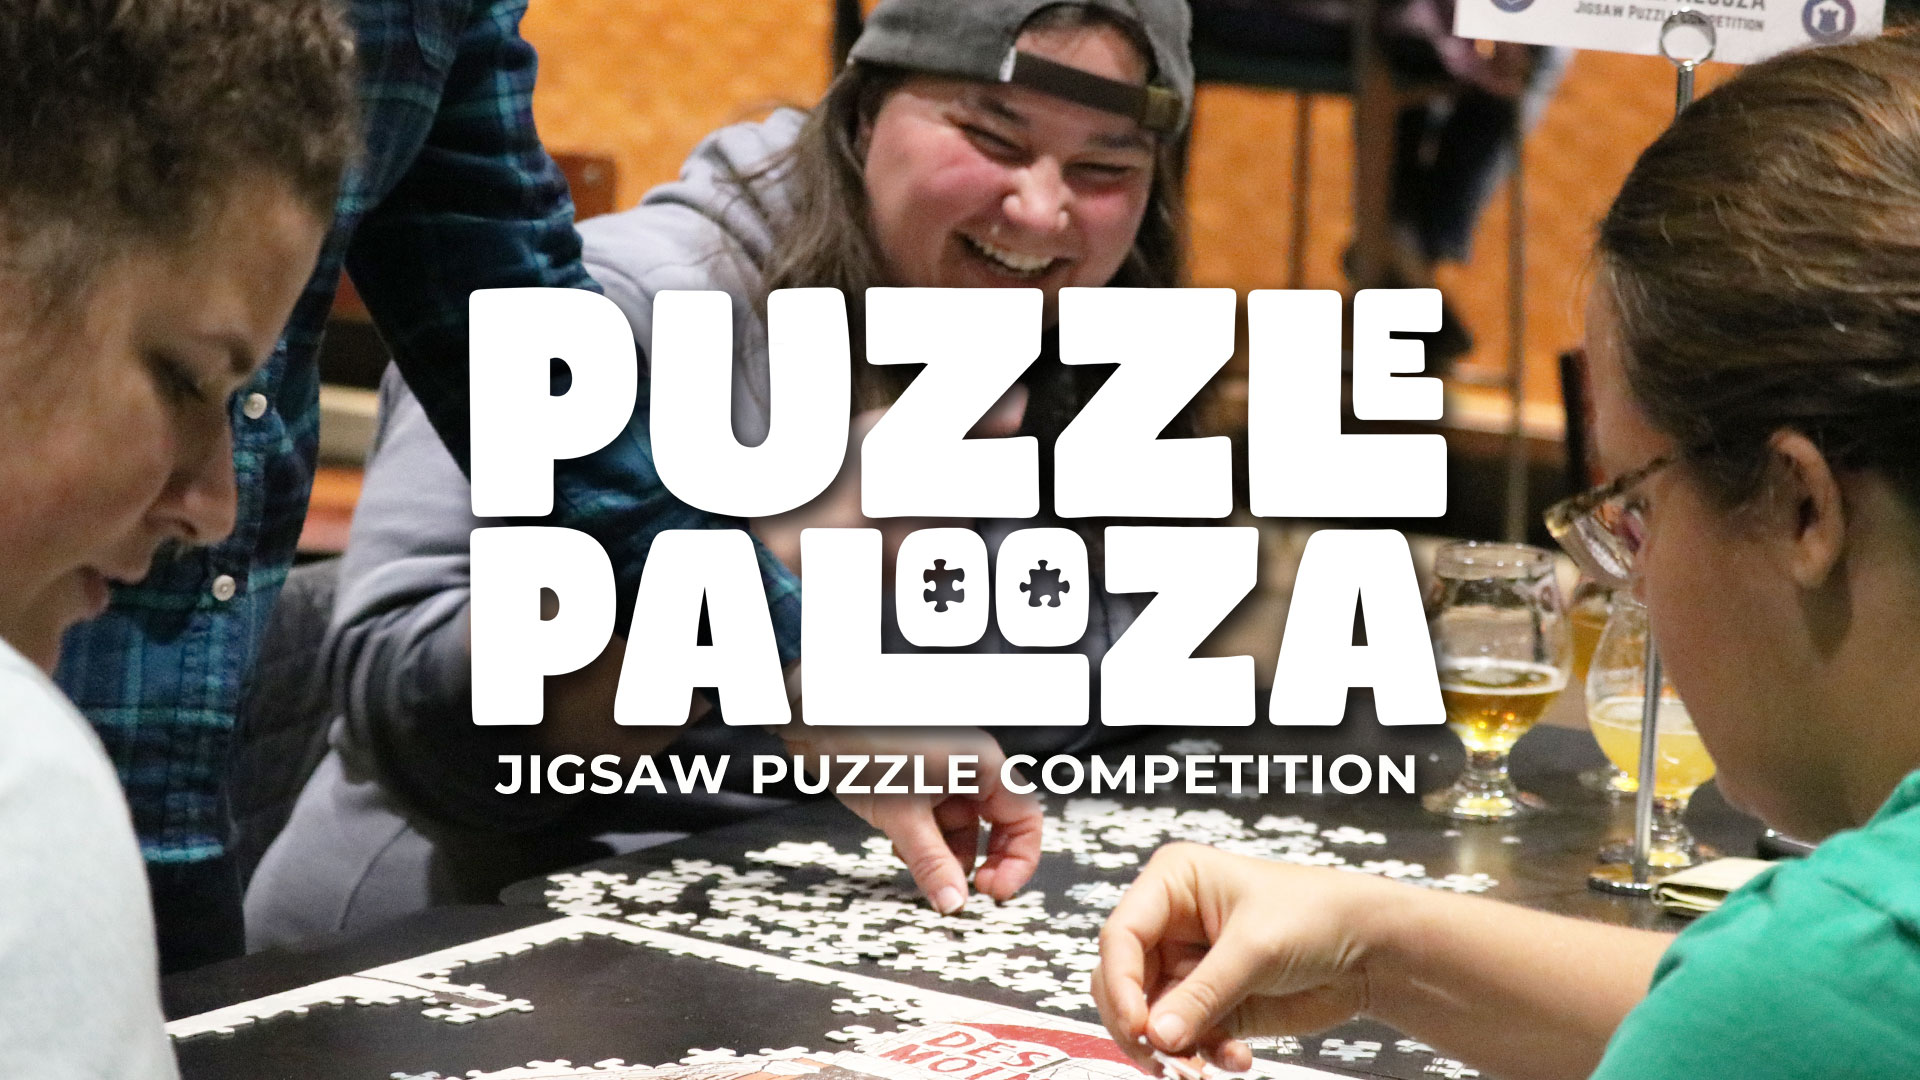 Puzzlepalooza Jigsaw Puzzle Competition at Peace Tree Brewing Des Moines Iowa